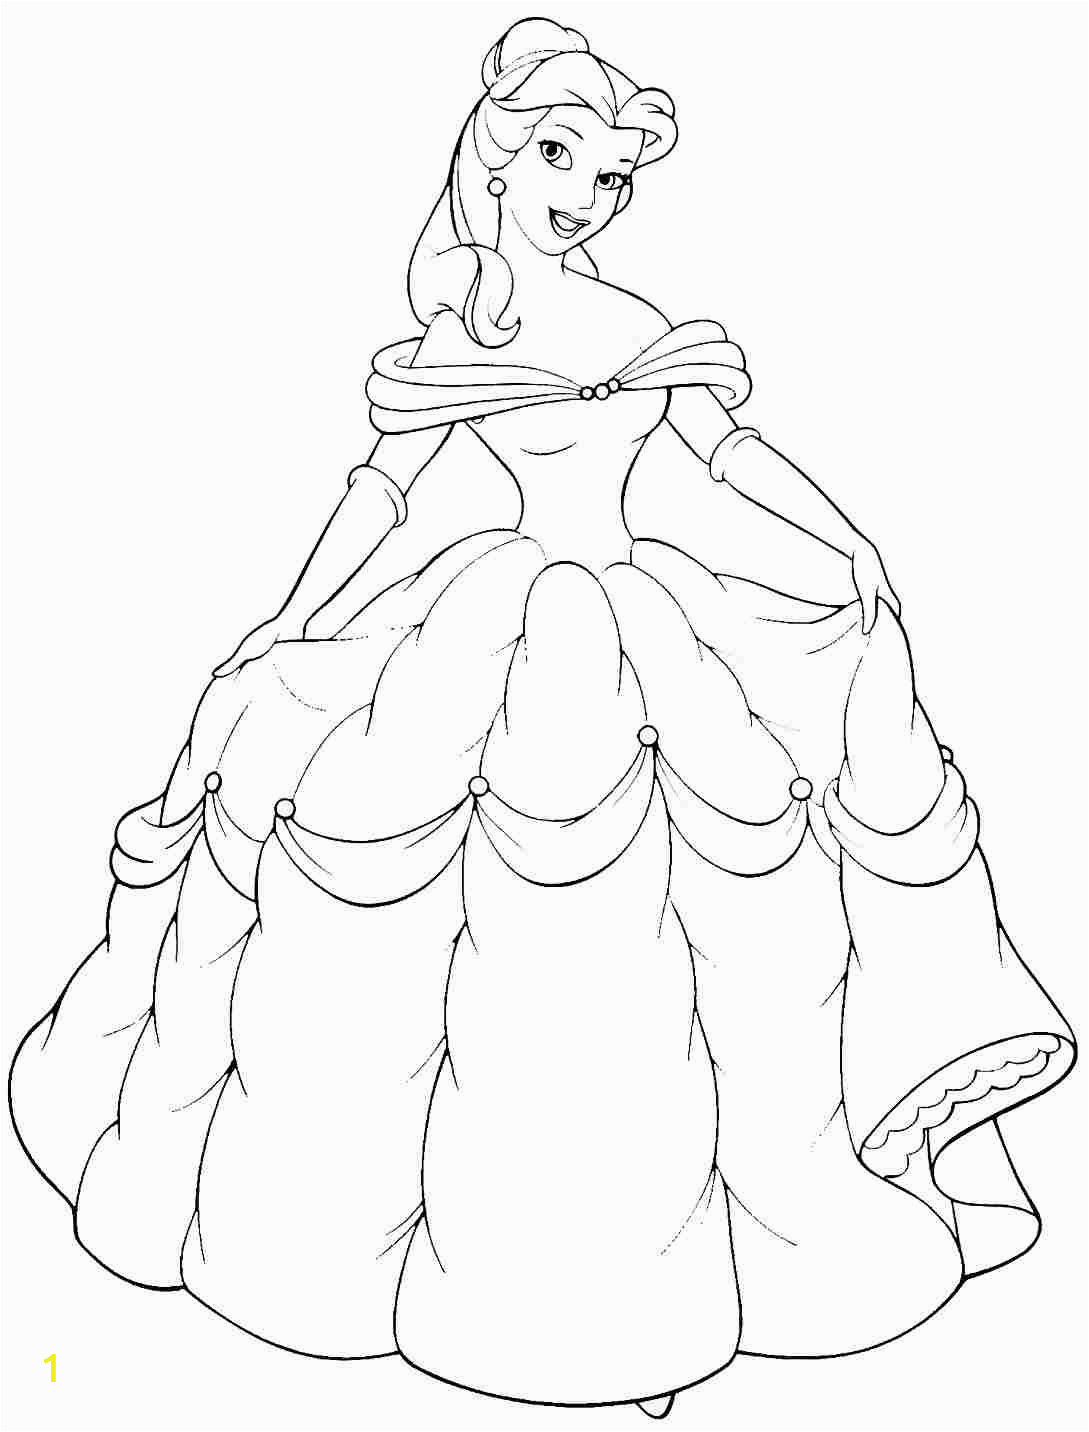 Coloring Pages Disney Princess Jasmine Free Printable Belle Coloring Pages for Kids Imagens